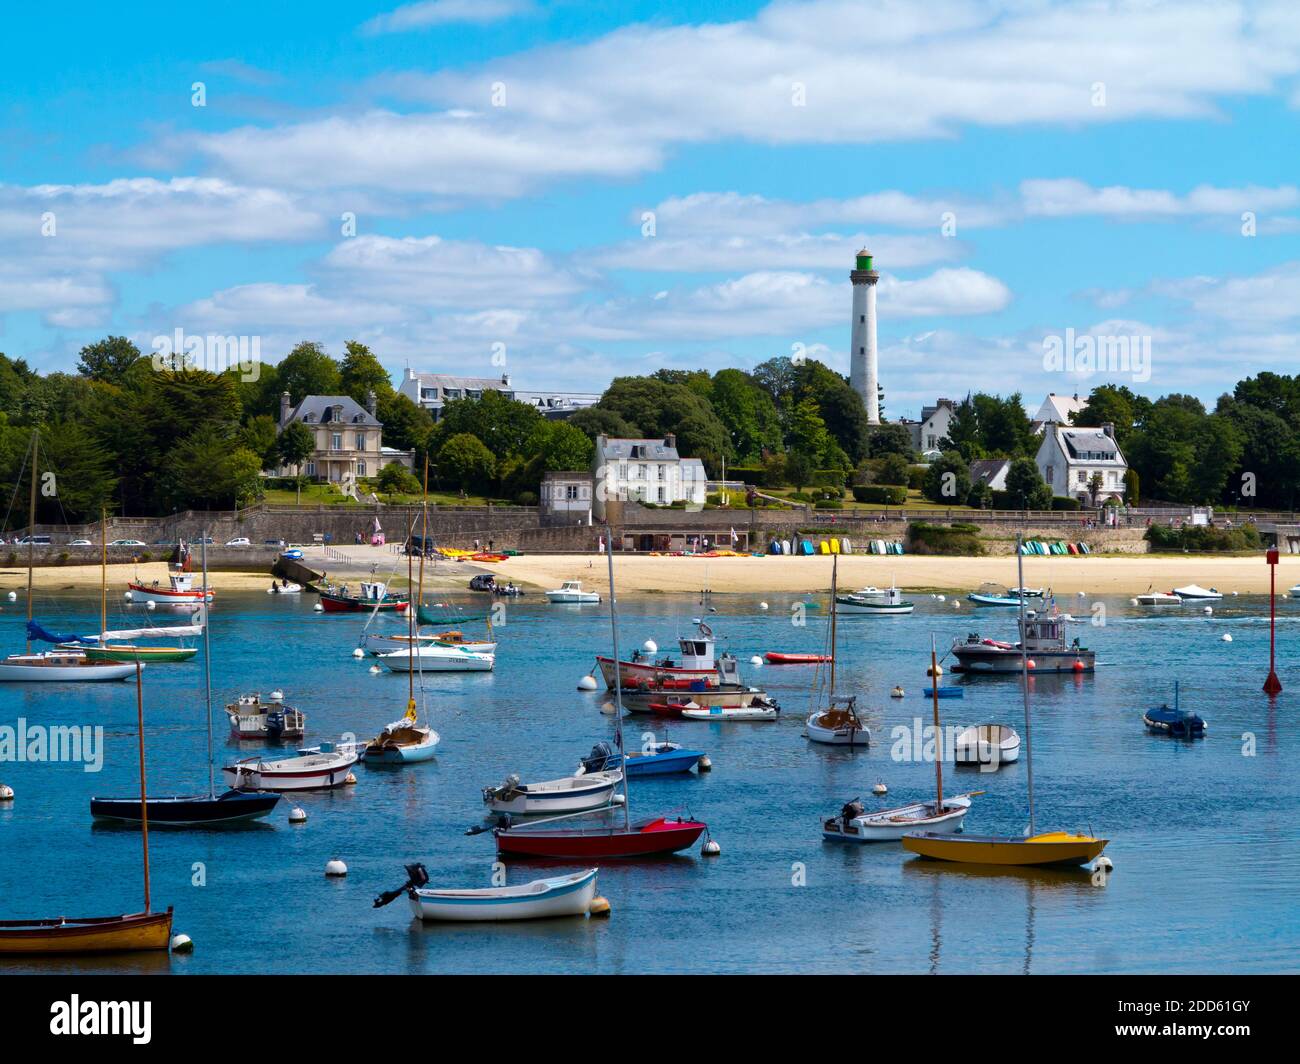 Summer view of Benodet a coastal town on the River Odet estuary in Finistere Brittany north west France with boats moored in the harbour. Stock Photo